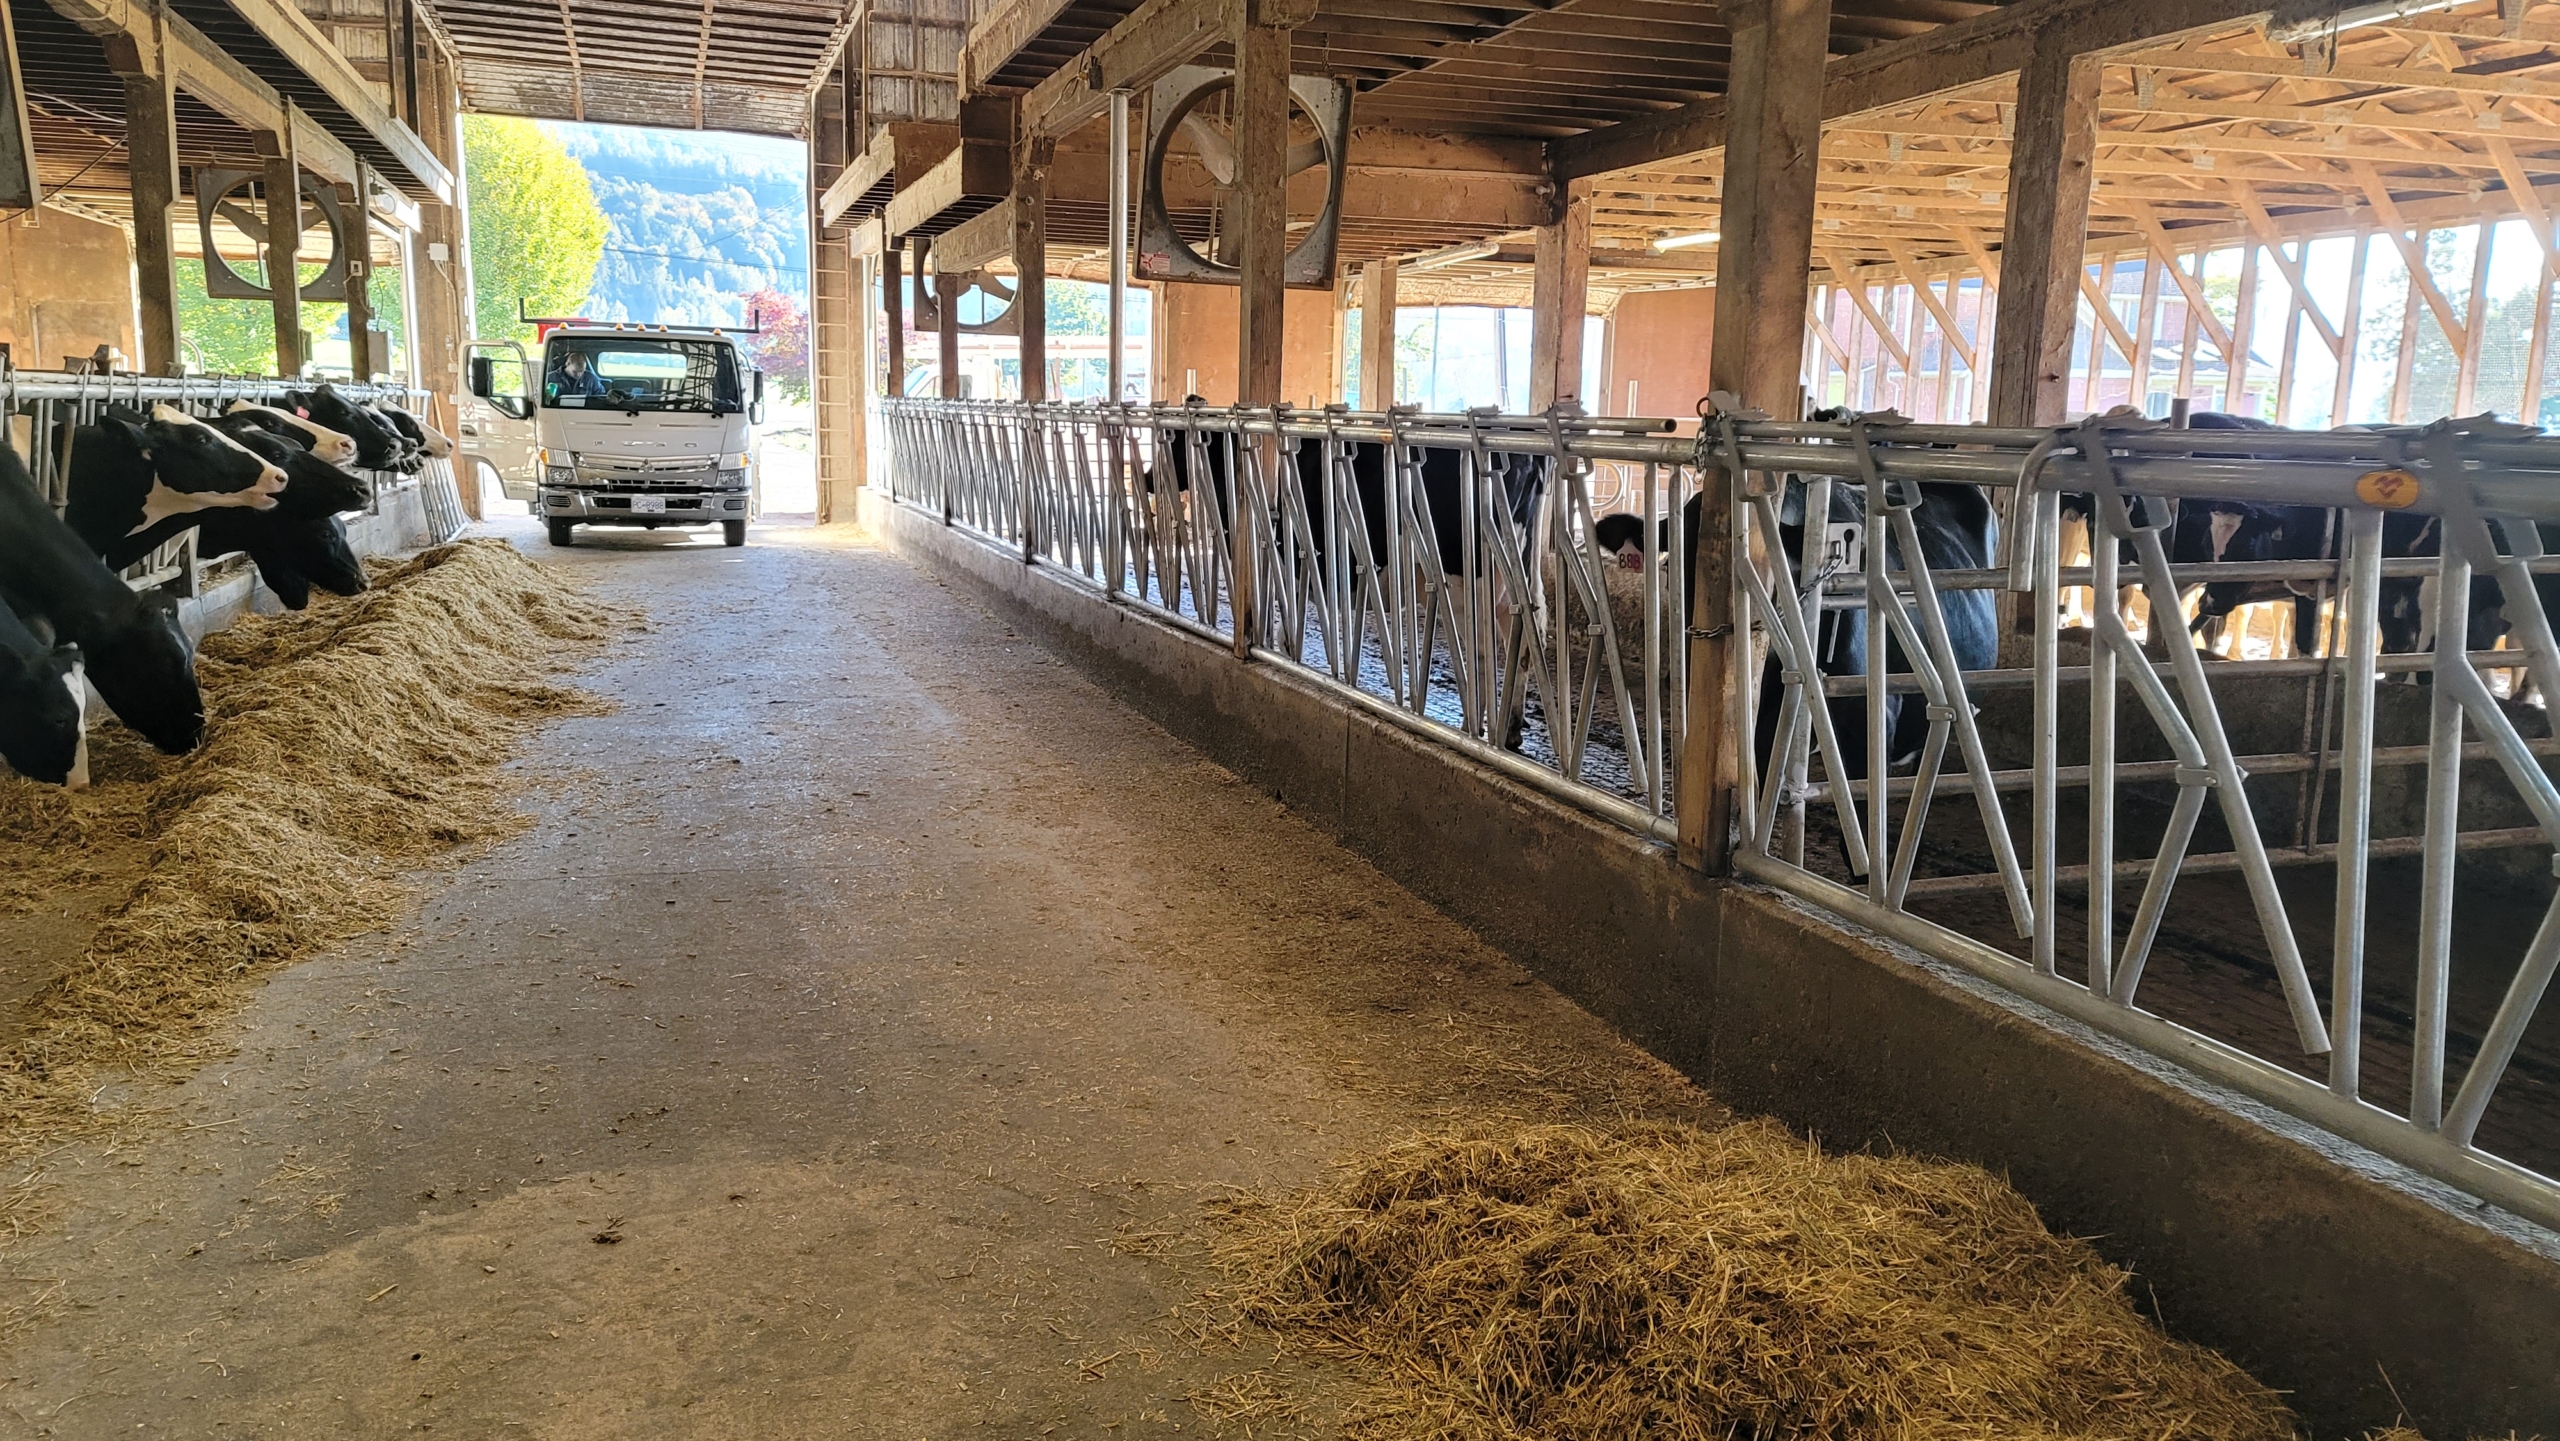 The view from inside a dairy cow barn looking along a long row of dairy cow stanchions.